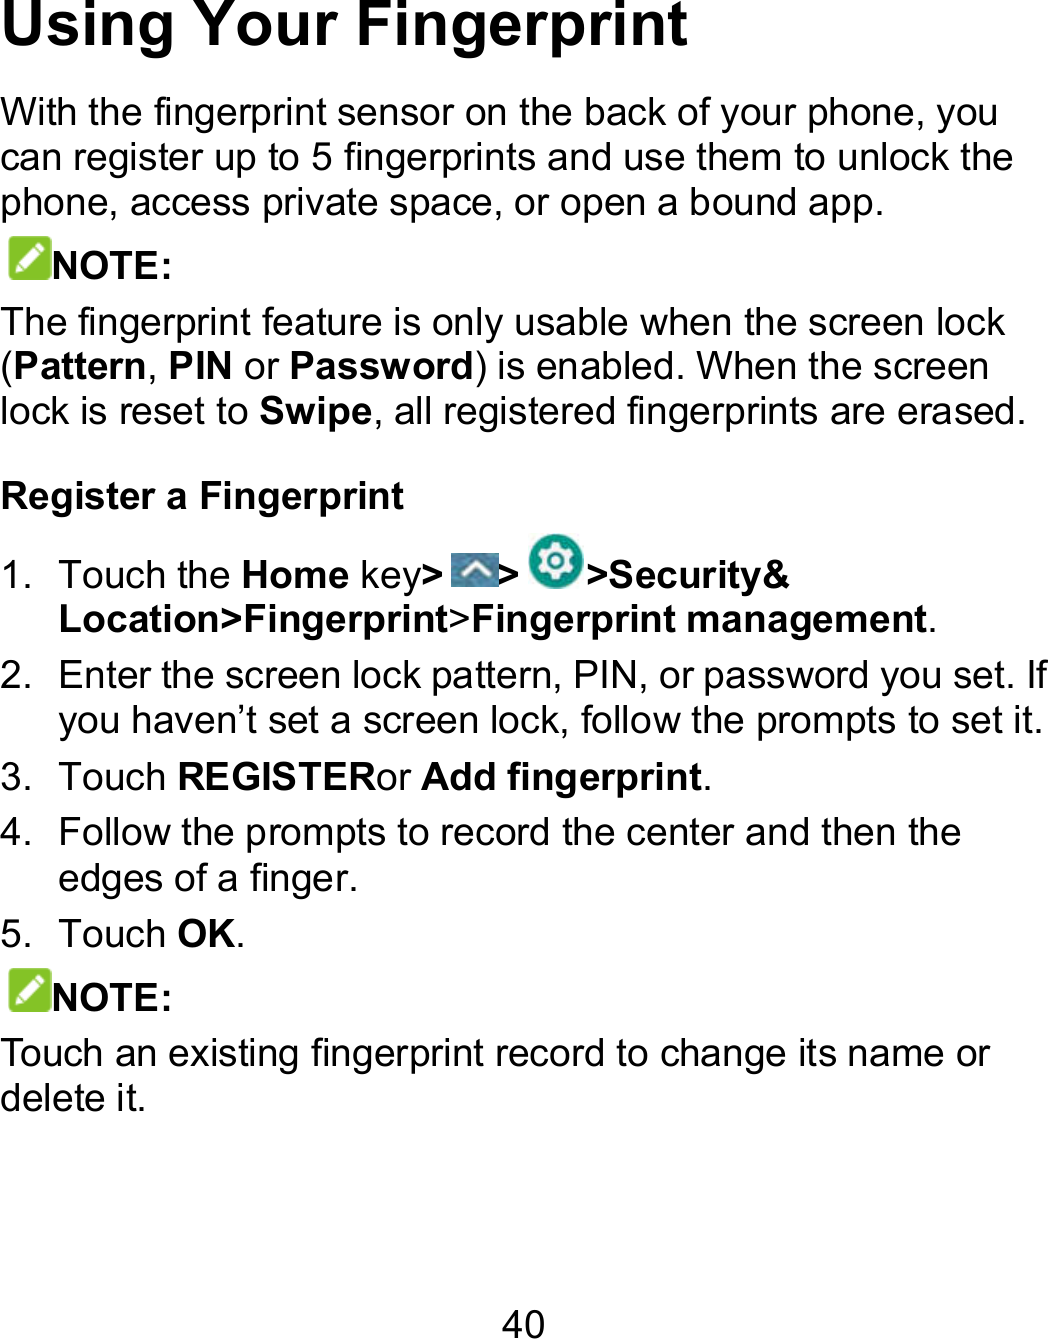 40 Using Your Fingerprint With the fingerprint sensor on the back of your phone, you can register up to 5 fingerprints and use them to unlock the phone, access private space, or open a bound app. NOTE: The fingerprint feature is only usable when the screen lock (Pattern, PIN or Password) is enabled. When the screen lock is reset to Swipe, all registered fingerprints are erased. Register a Fingerprint 1.  Touch the Home key&gt; &gt; &gt;Security&amp; Location&gt;Fingerprint&gt;Fingerprint management. 2.  Enter the screen lock pattern, PIN, or password you set. If you haven’t set a screen lock, follow the prompts to set it. 3.  Touch REGISTERor Add fingerprint. 4.  Follow the prompts to record the center and then the edges of a finger. 5.  Touch OK. NOTE: Touch an existing fingerprint record to change its name or delete it. 